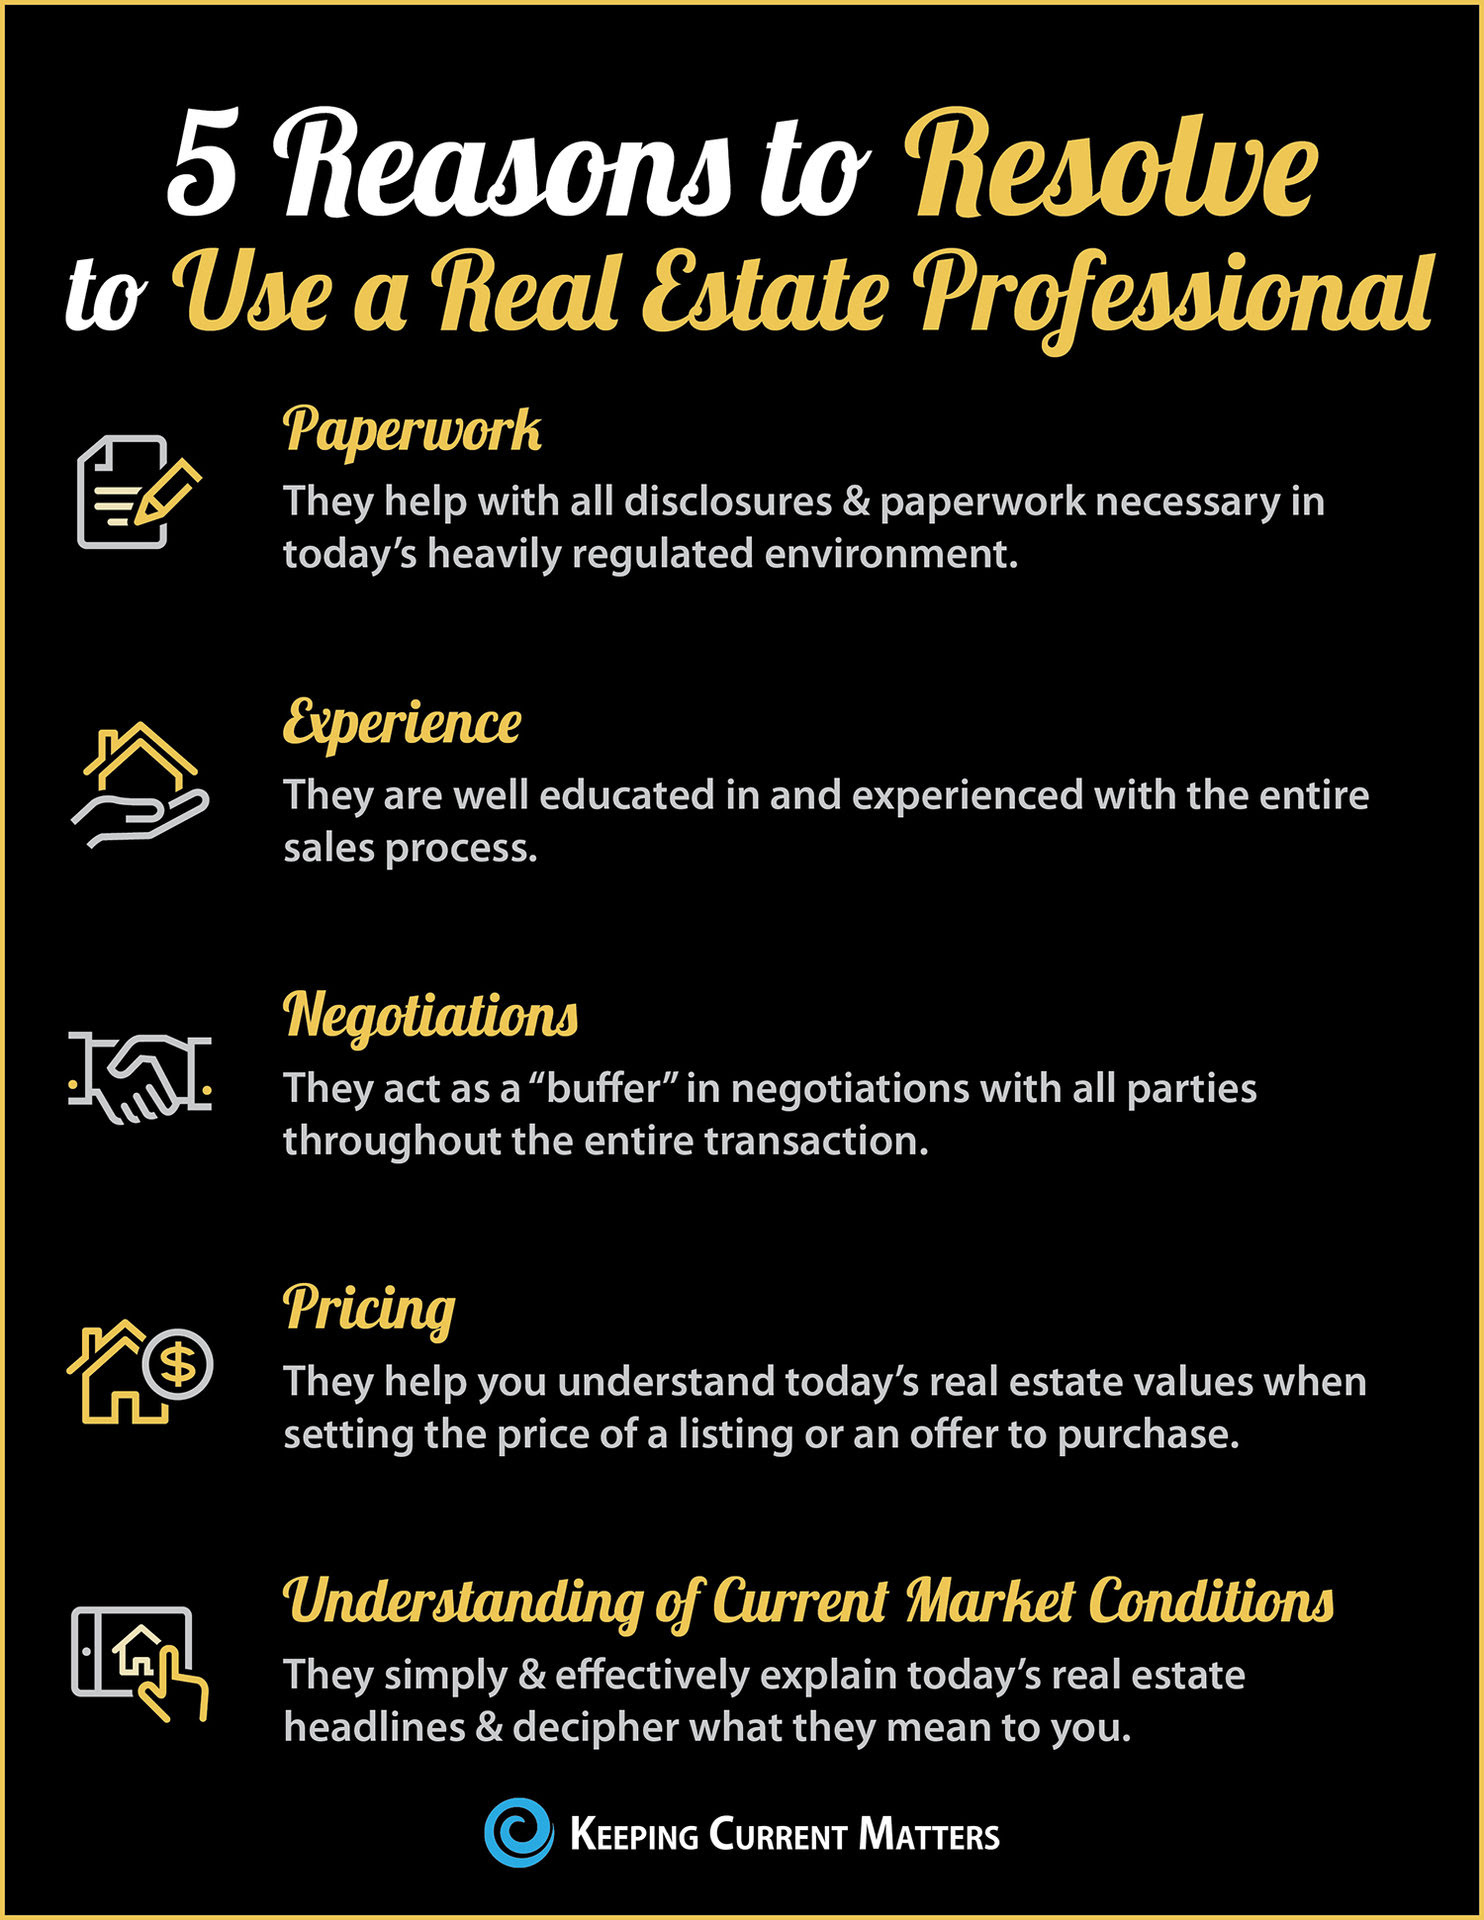 Buying or Selling in 2018? 5 Reasons to Resolve to Hire a Pro [INFOGRAPHIC] | Keeping Current Matters